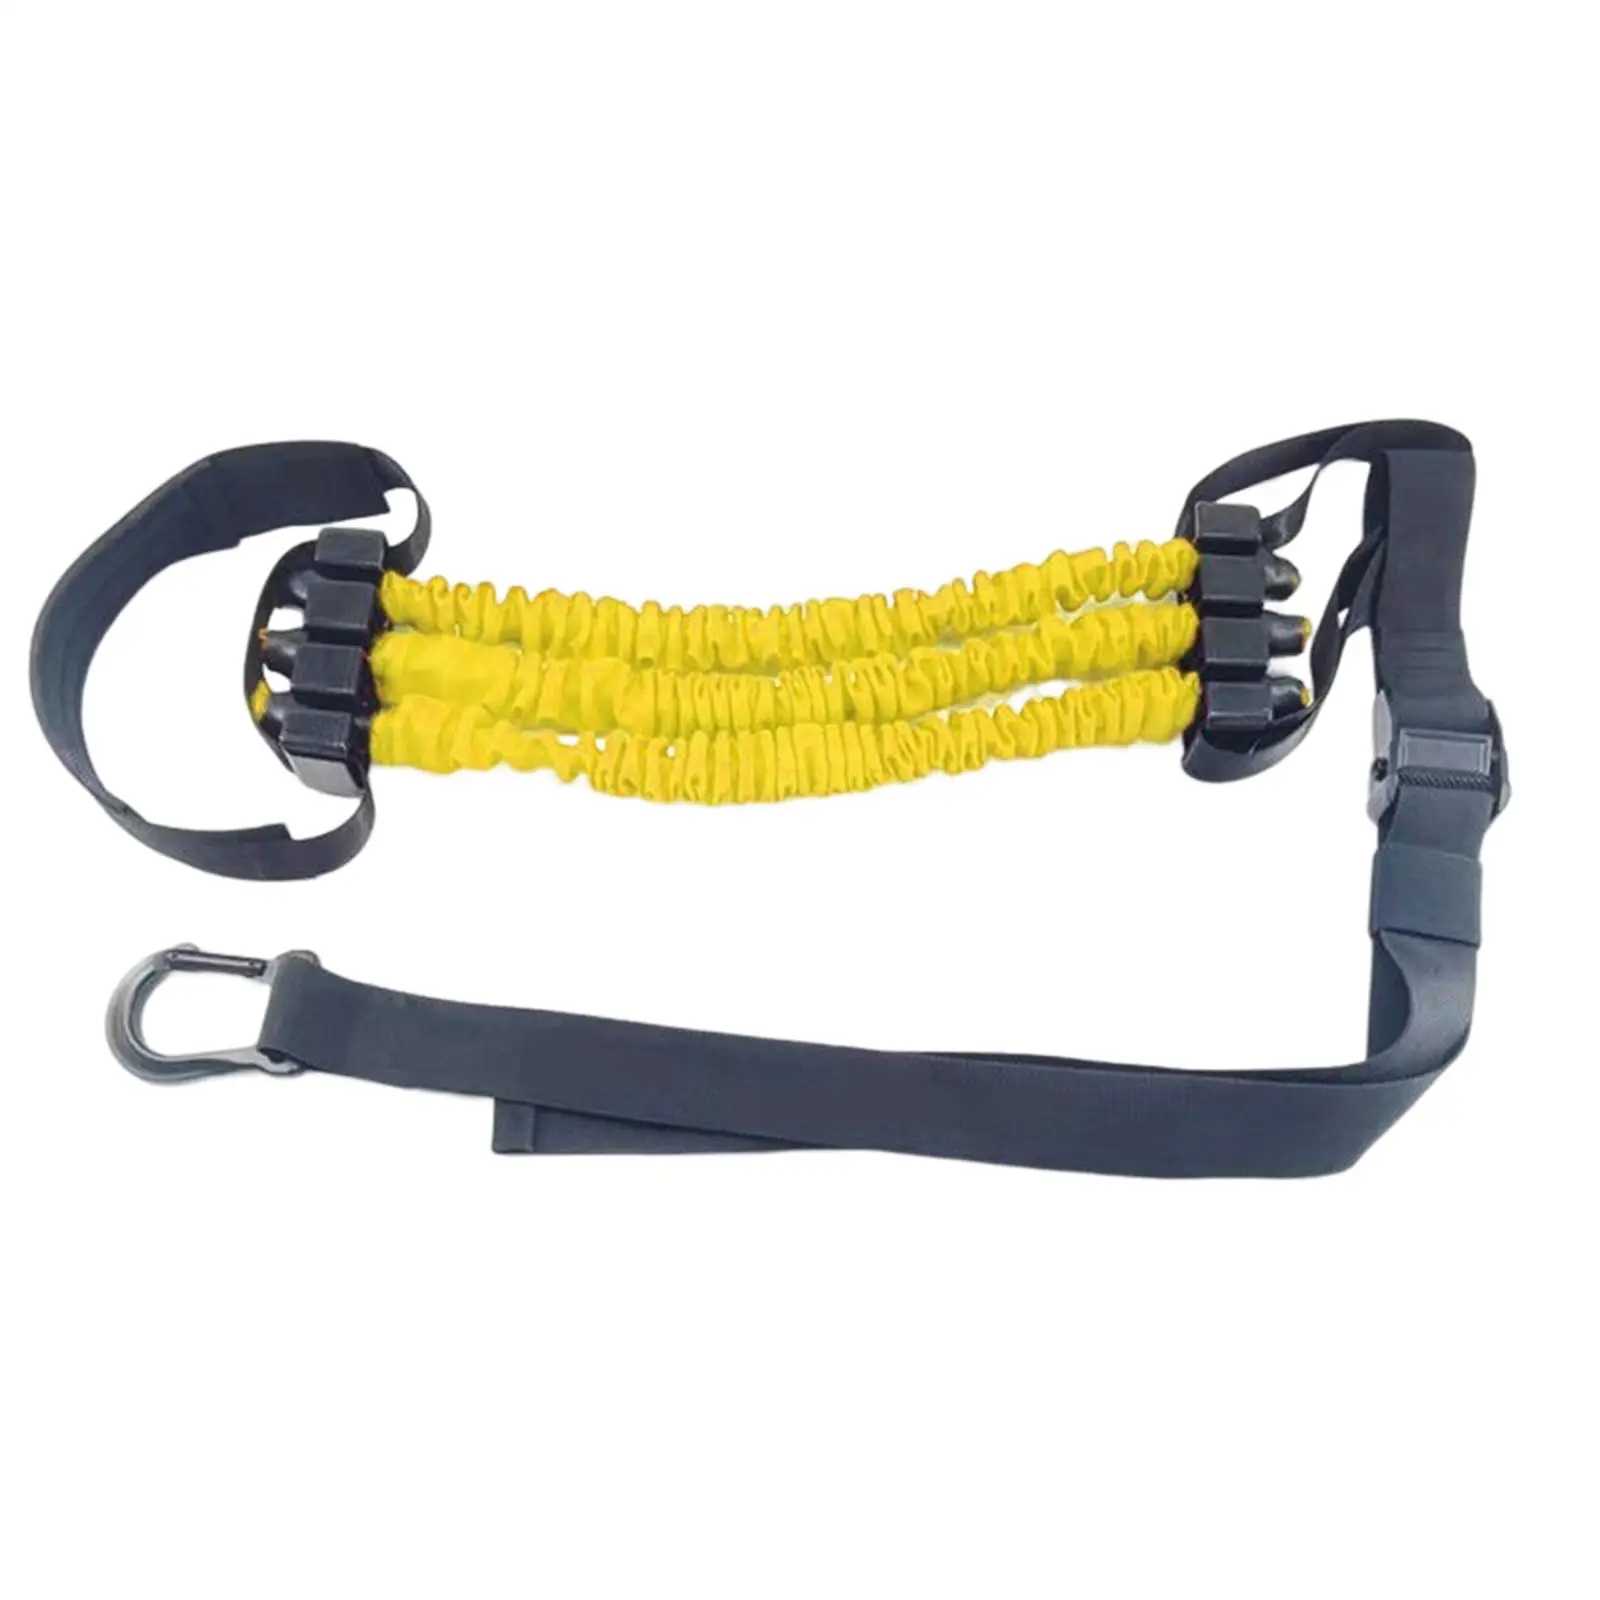 Premium Chin up Assist Bands Resistance Bands Improve Shoulder Strength for Weight Lifting Training